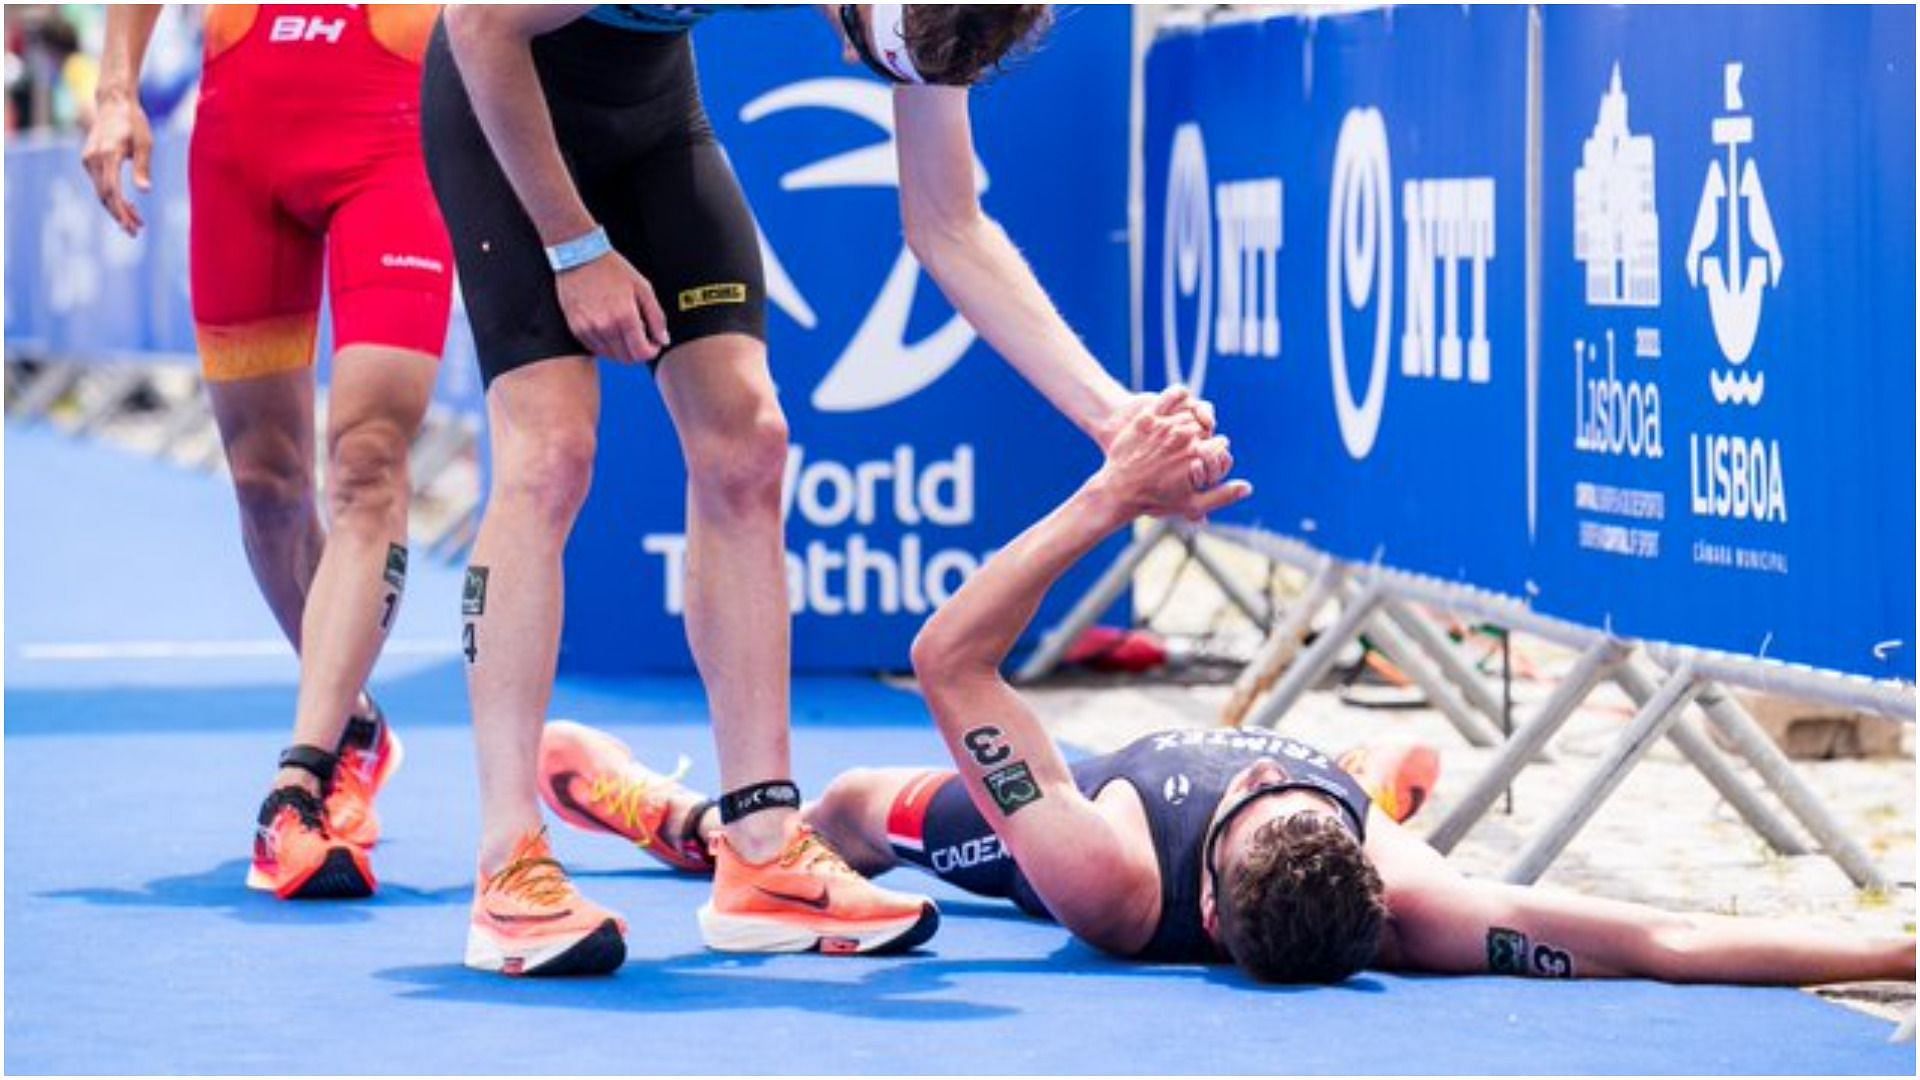 World Triathlon cracks down on Russia for &lsquo;significant&rsquo; doping cases (Pic Credit: World Triathlon)